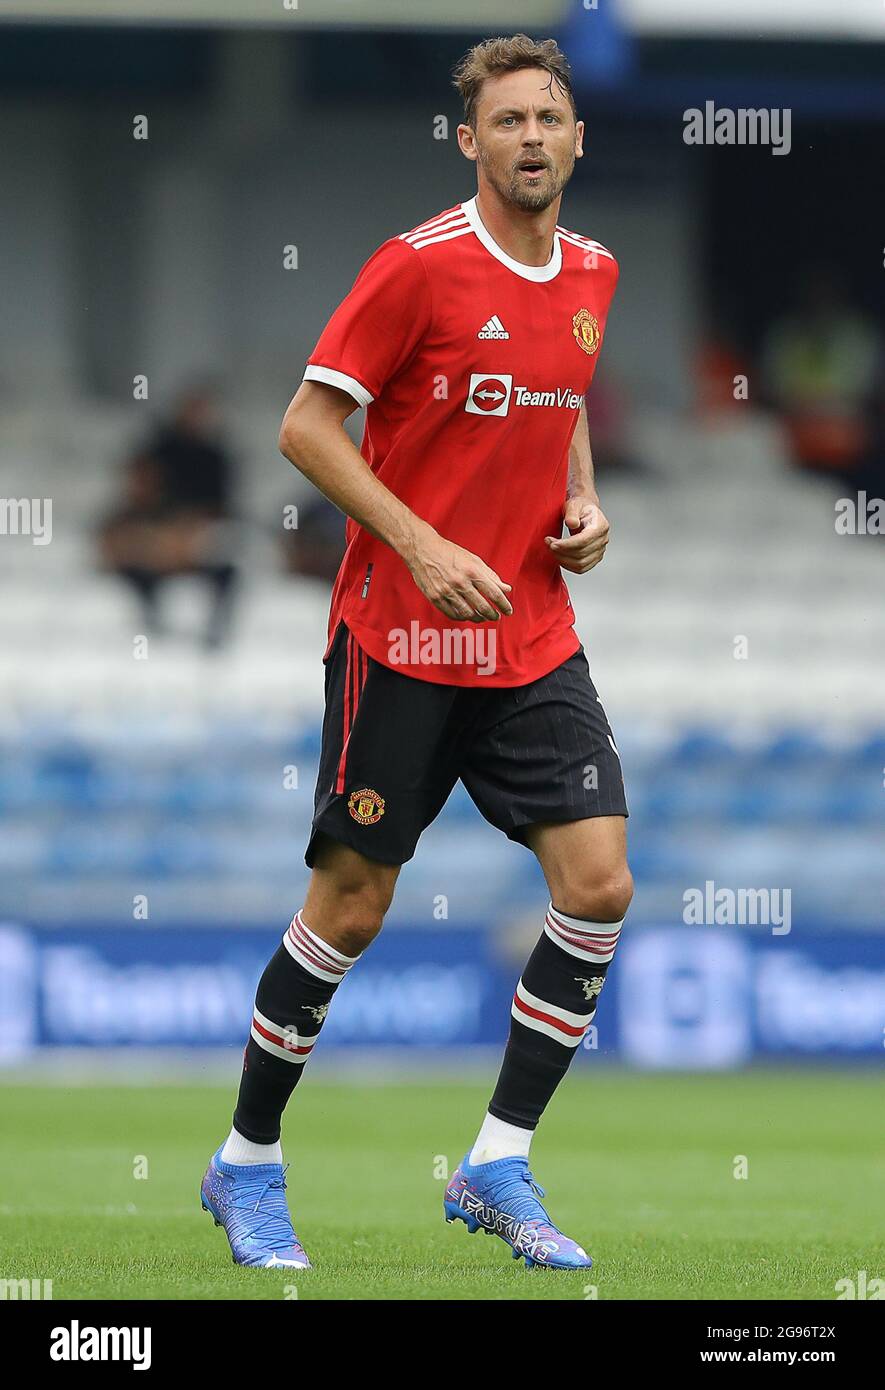 London, England, 24th July 2021. Manchester UnitedÕs Nemanja Matic during the Pre Season Friendly match at The Kiyan Prince Foundation Stadium, London. Picture credit should read: Paul Terry / Sportimage Stock Photo